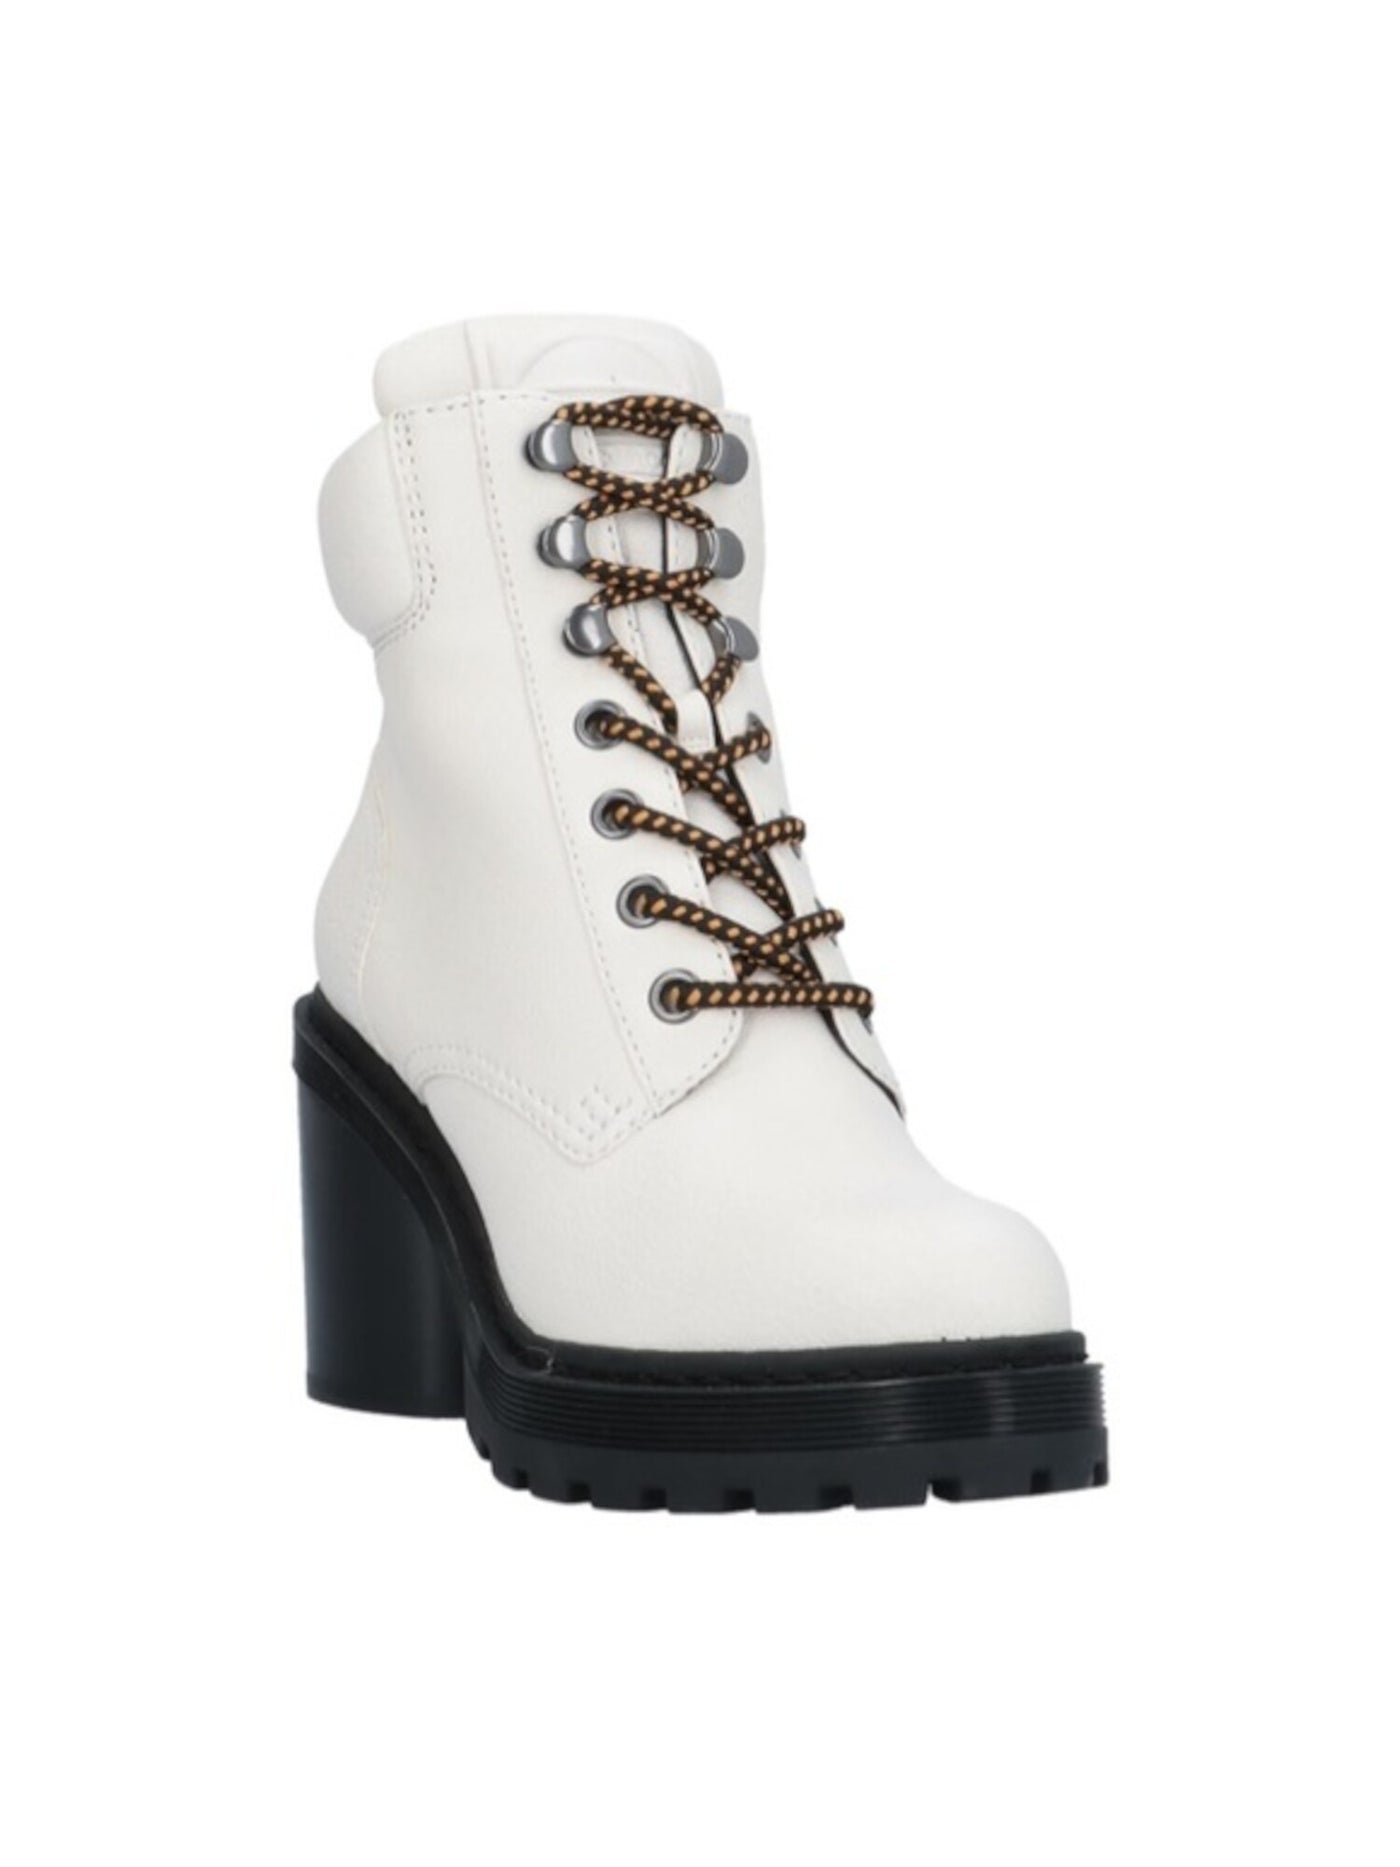 MARC JACOBS Womens Ivory Double J Hardware Crosby Round Toe Block Heel Lace-Up Leather Hiking Boots 37